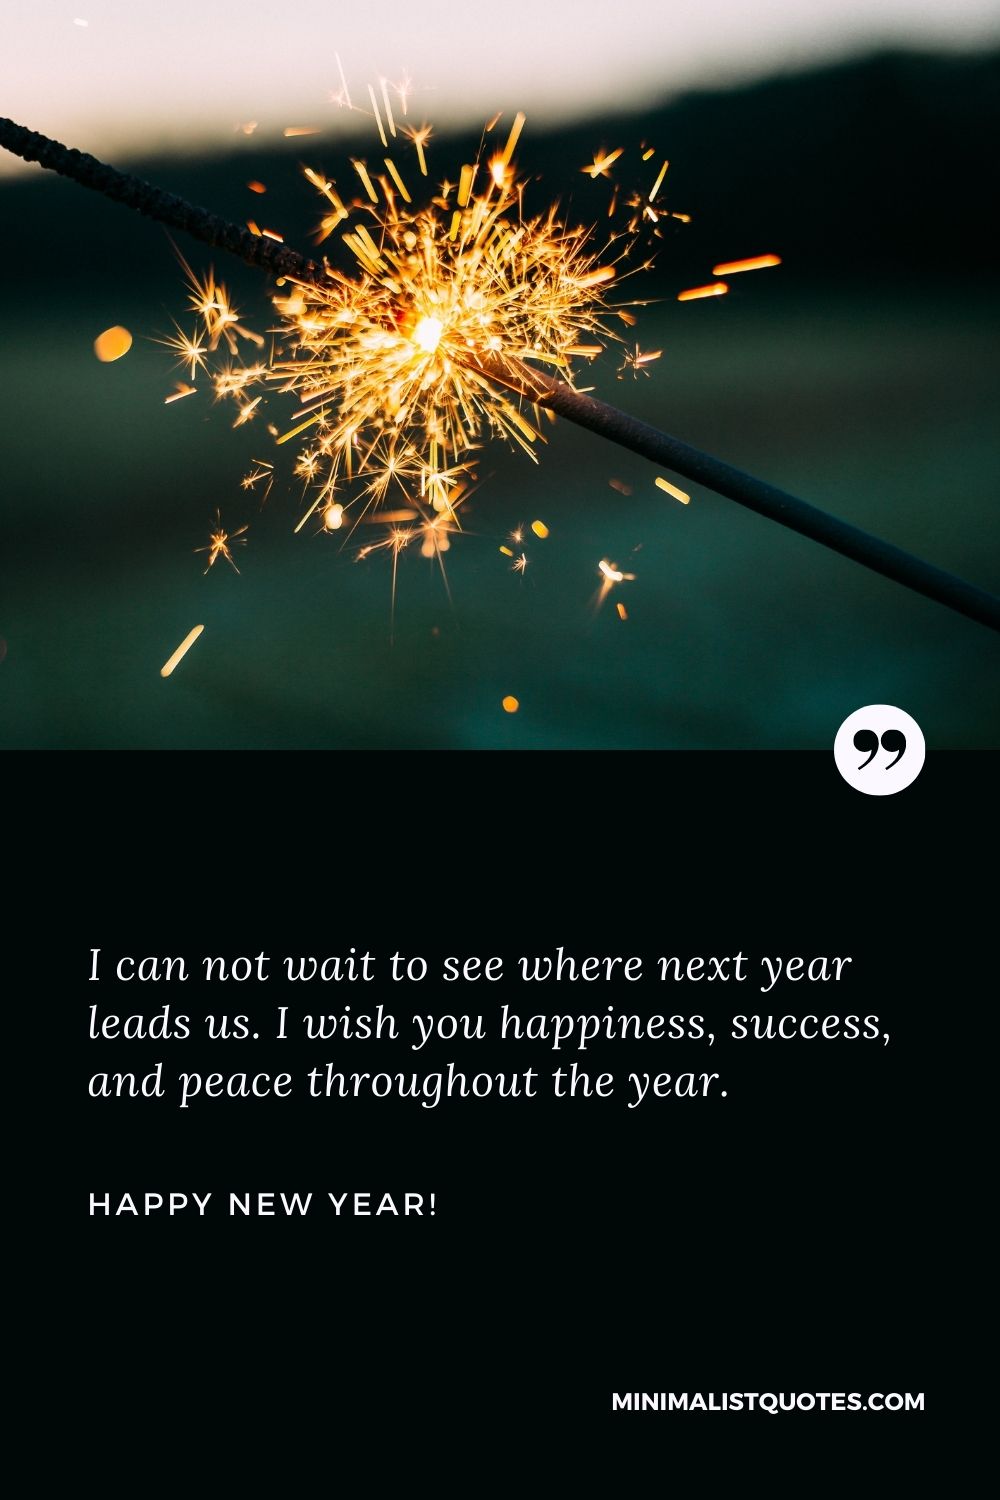 Happy New Year wishes SMS messages: I can not wait to see where next year leads us. I wish you happiness, success, and peace throughout the year. Happy New Year!